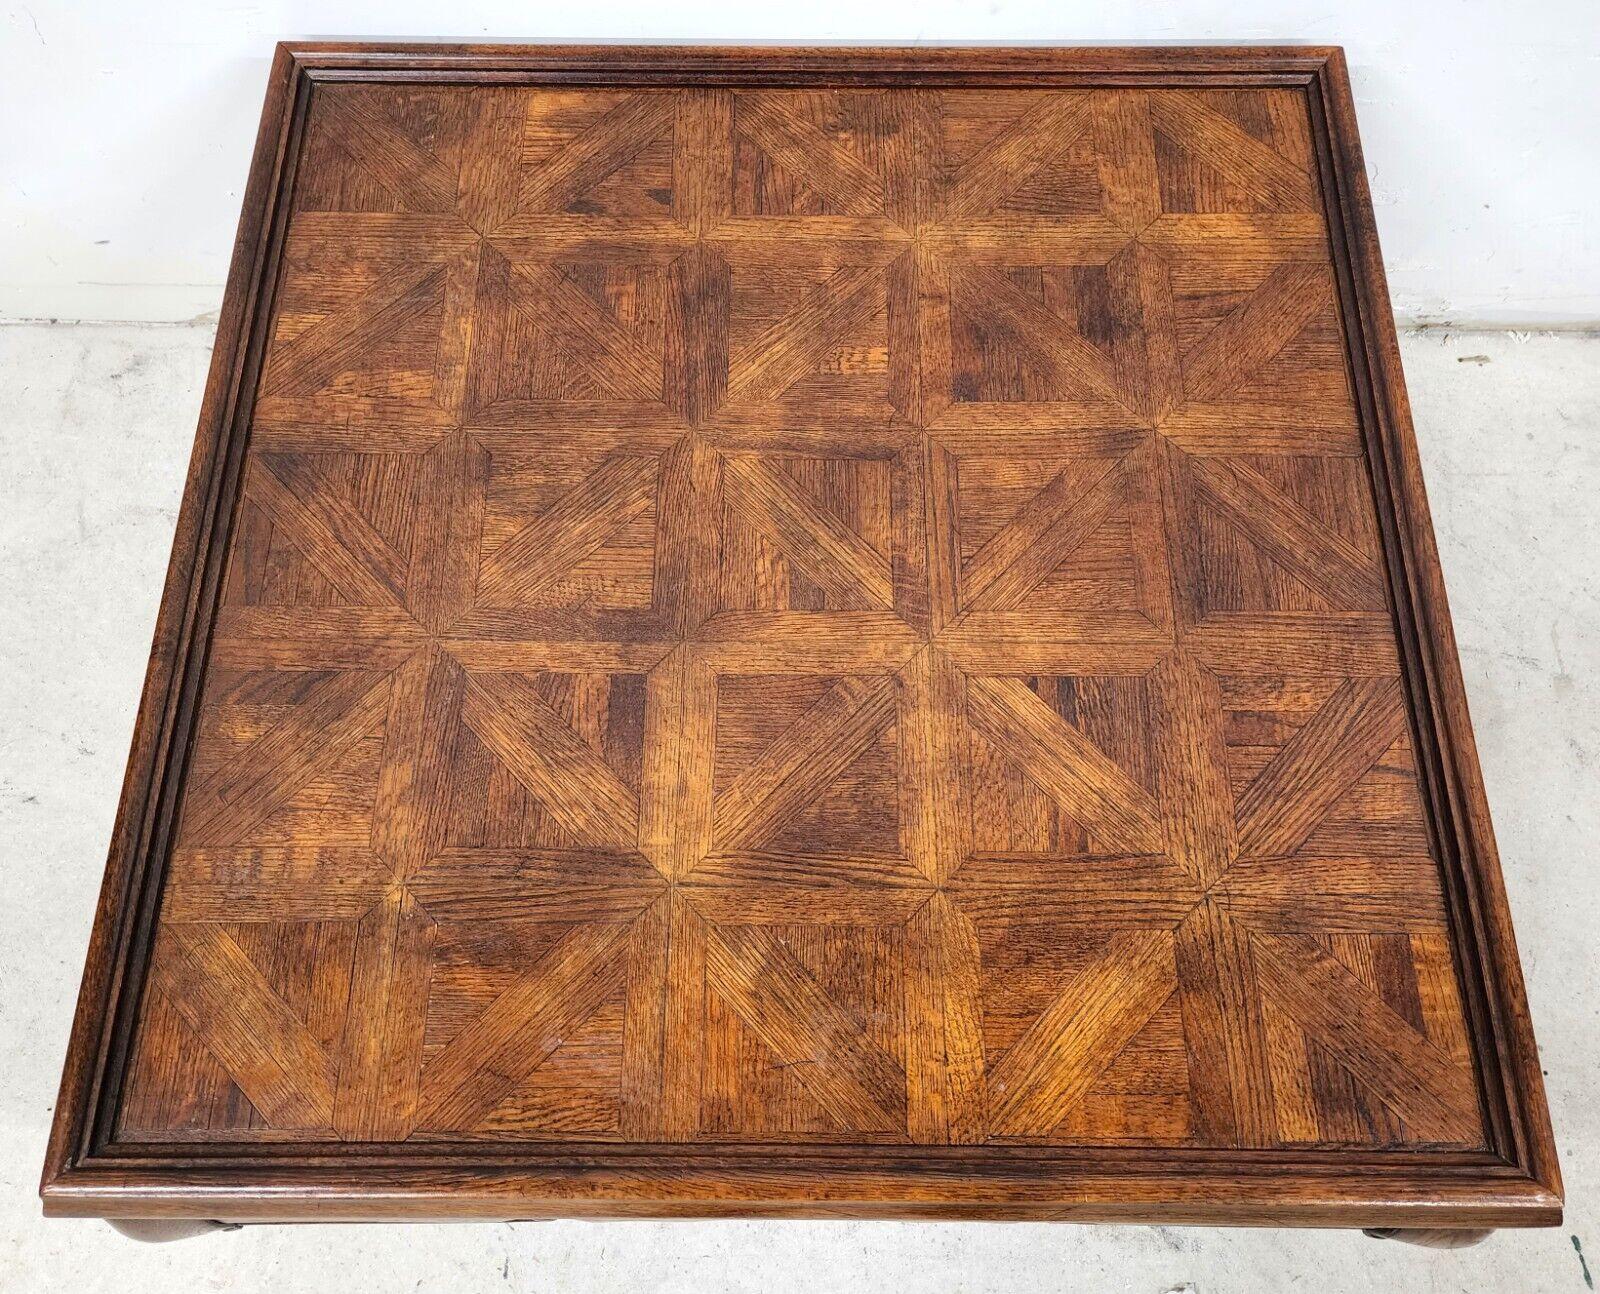 Offering one of our recent palm beach estate fine furniture acquisitions of a 
Henredon Vintage French Country Parquet Top Coffee Table.

Approximate Measurements in Inches
16.75